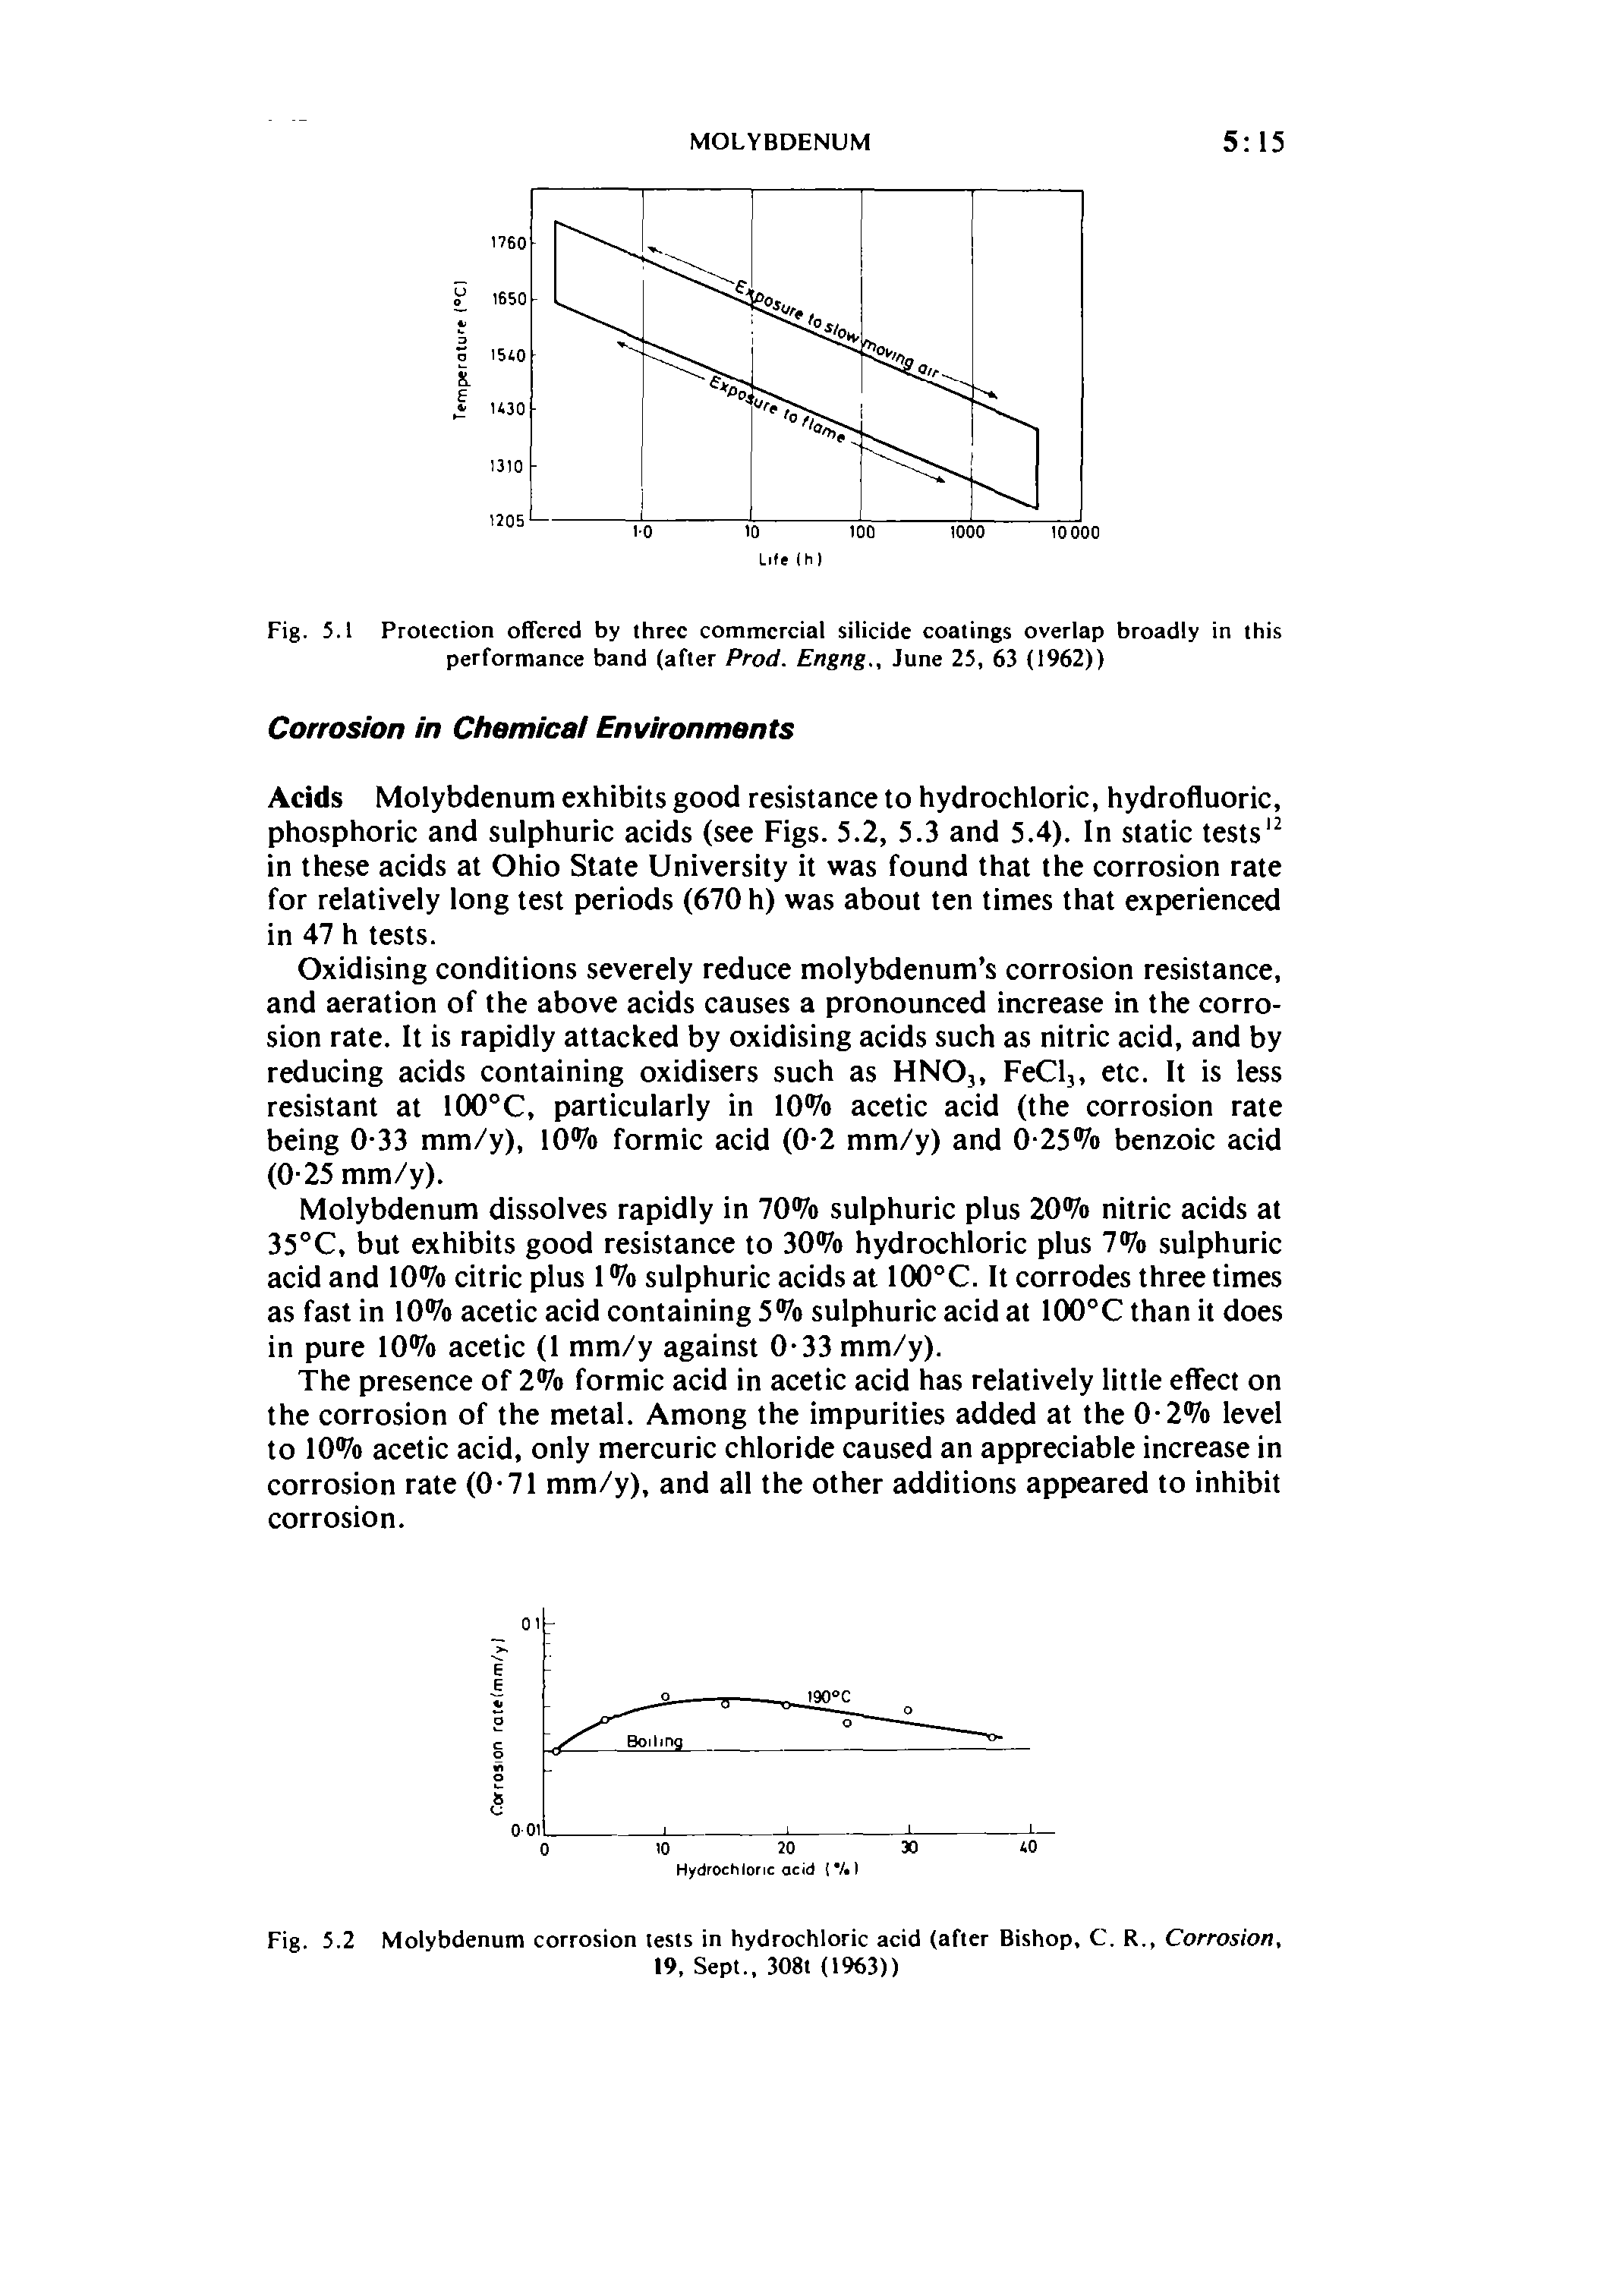 Fig. 5.1 Protection offered by three commercial silicide coatings overlap broadly in this performance band (after Prod. Engng., June 25, 63 (1962))...